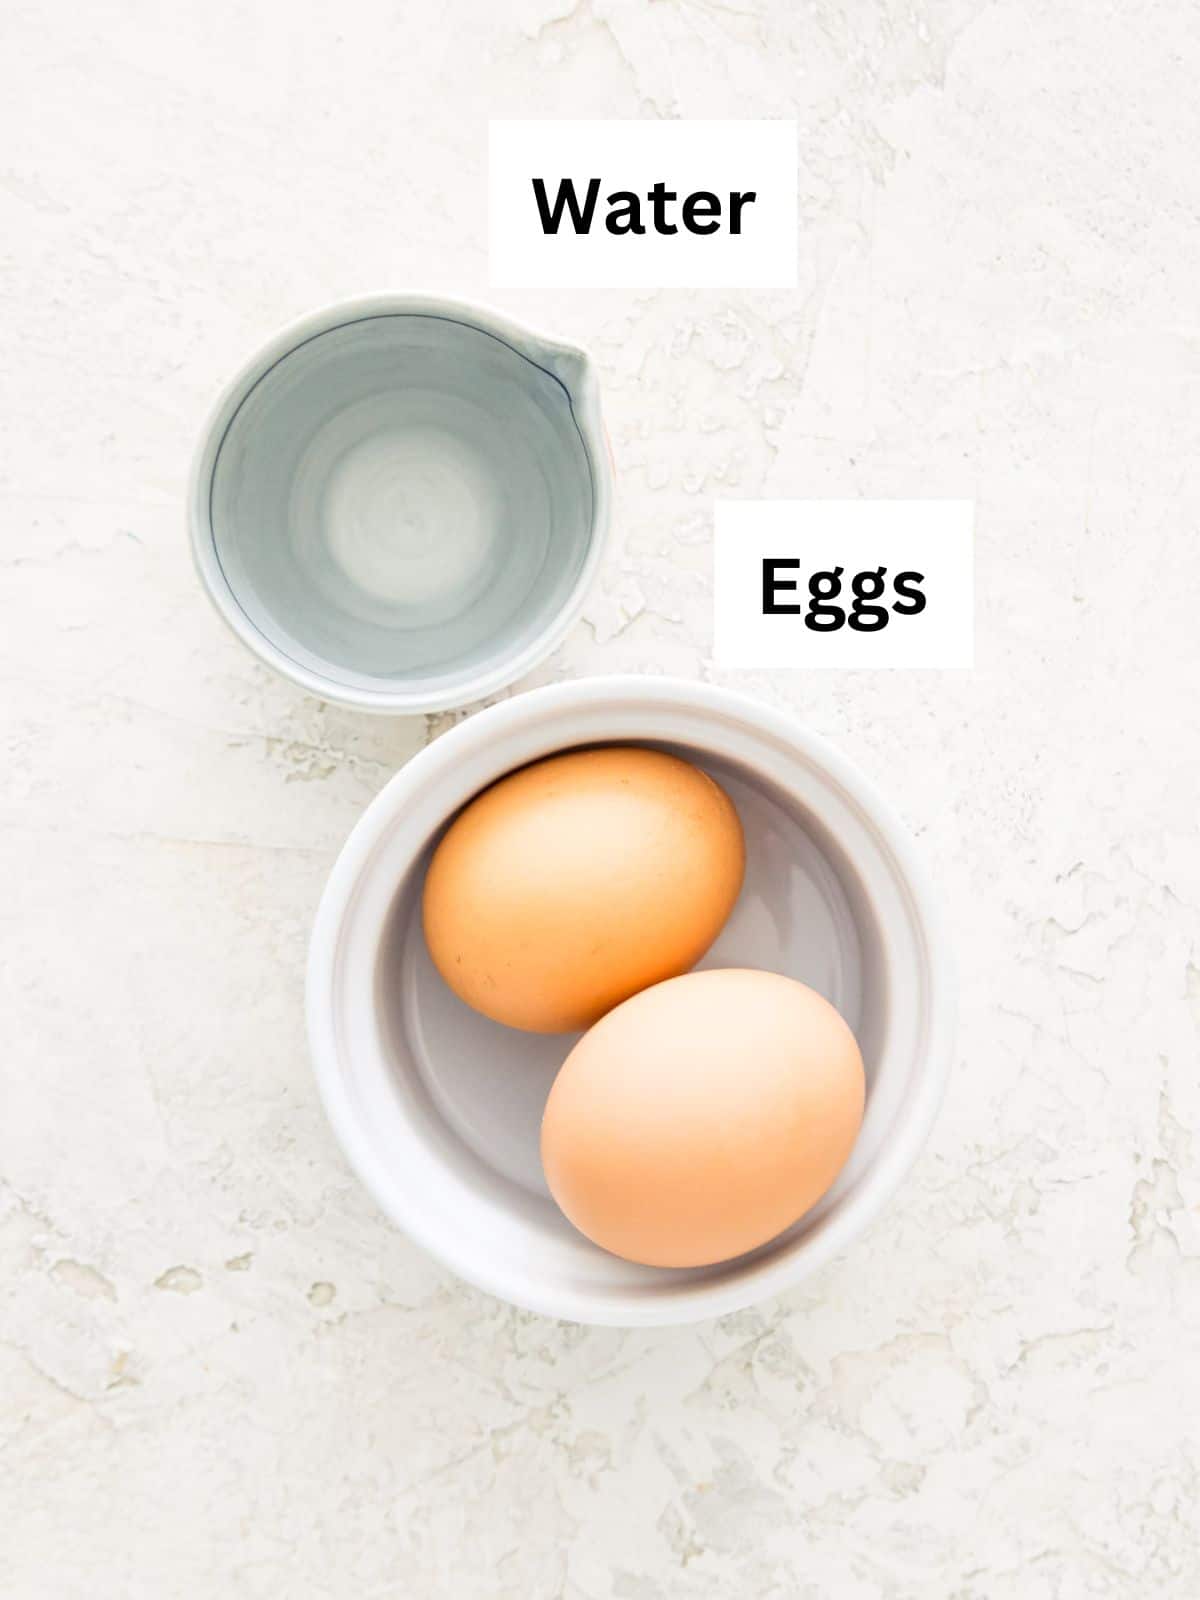 Water in a measuring cup and eggs in a white bowl.